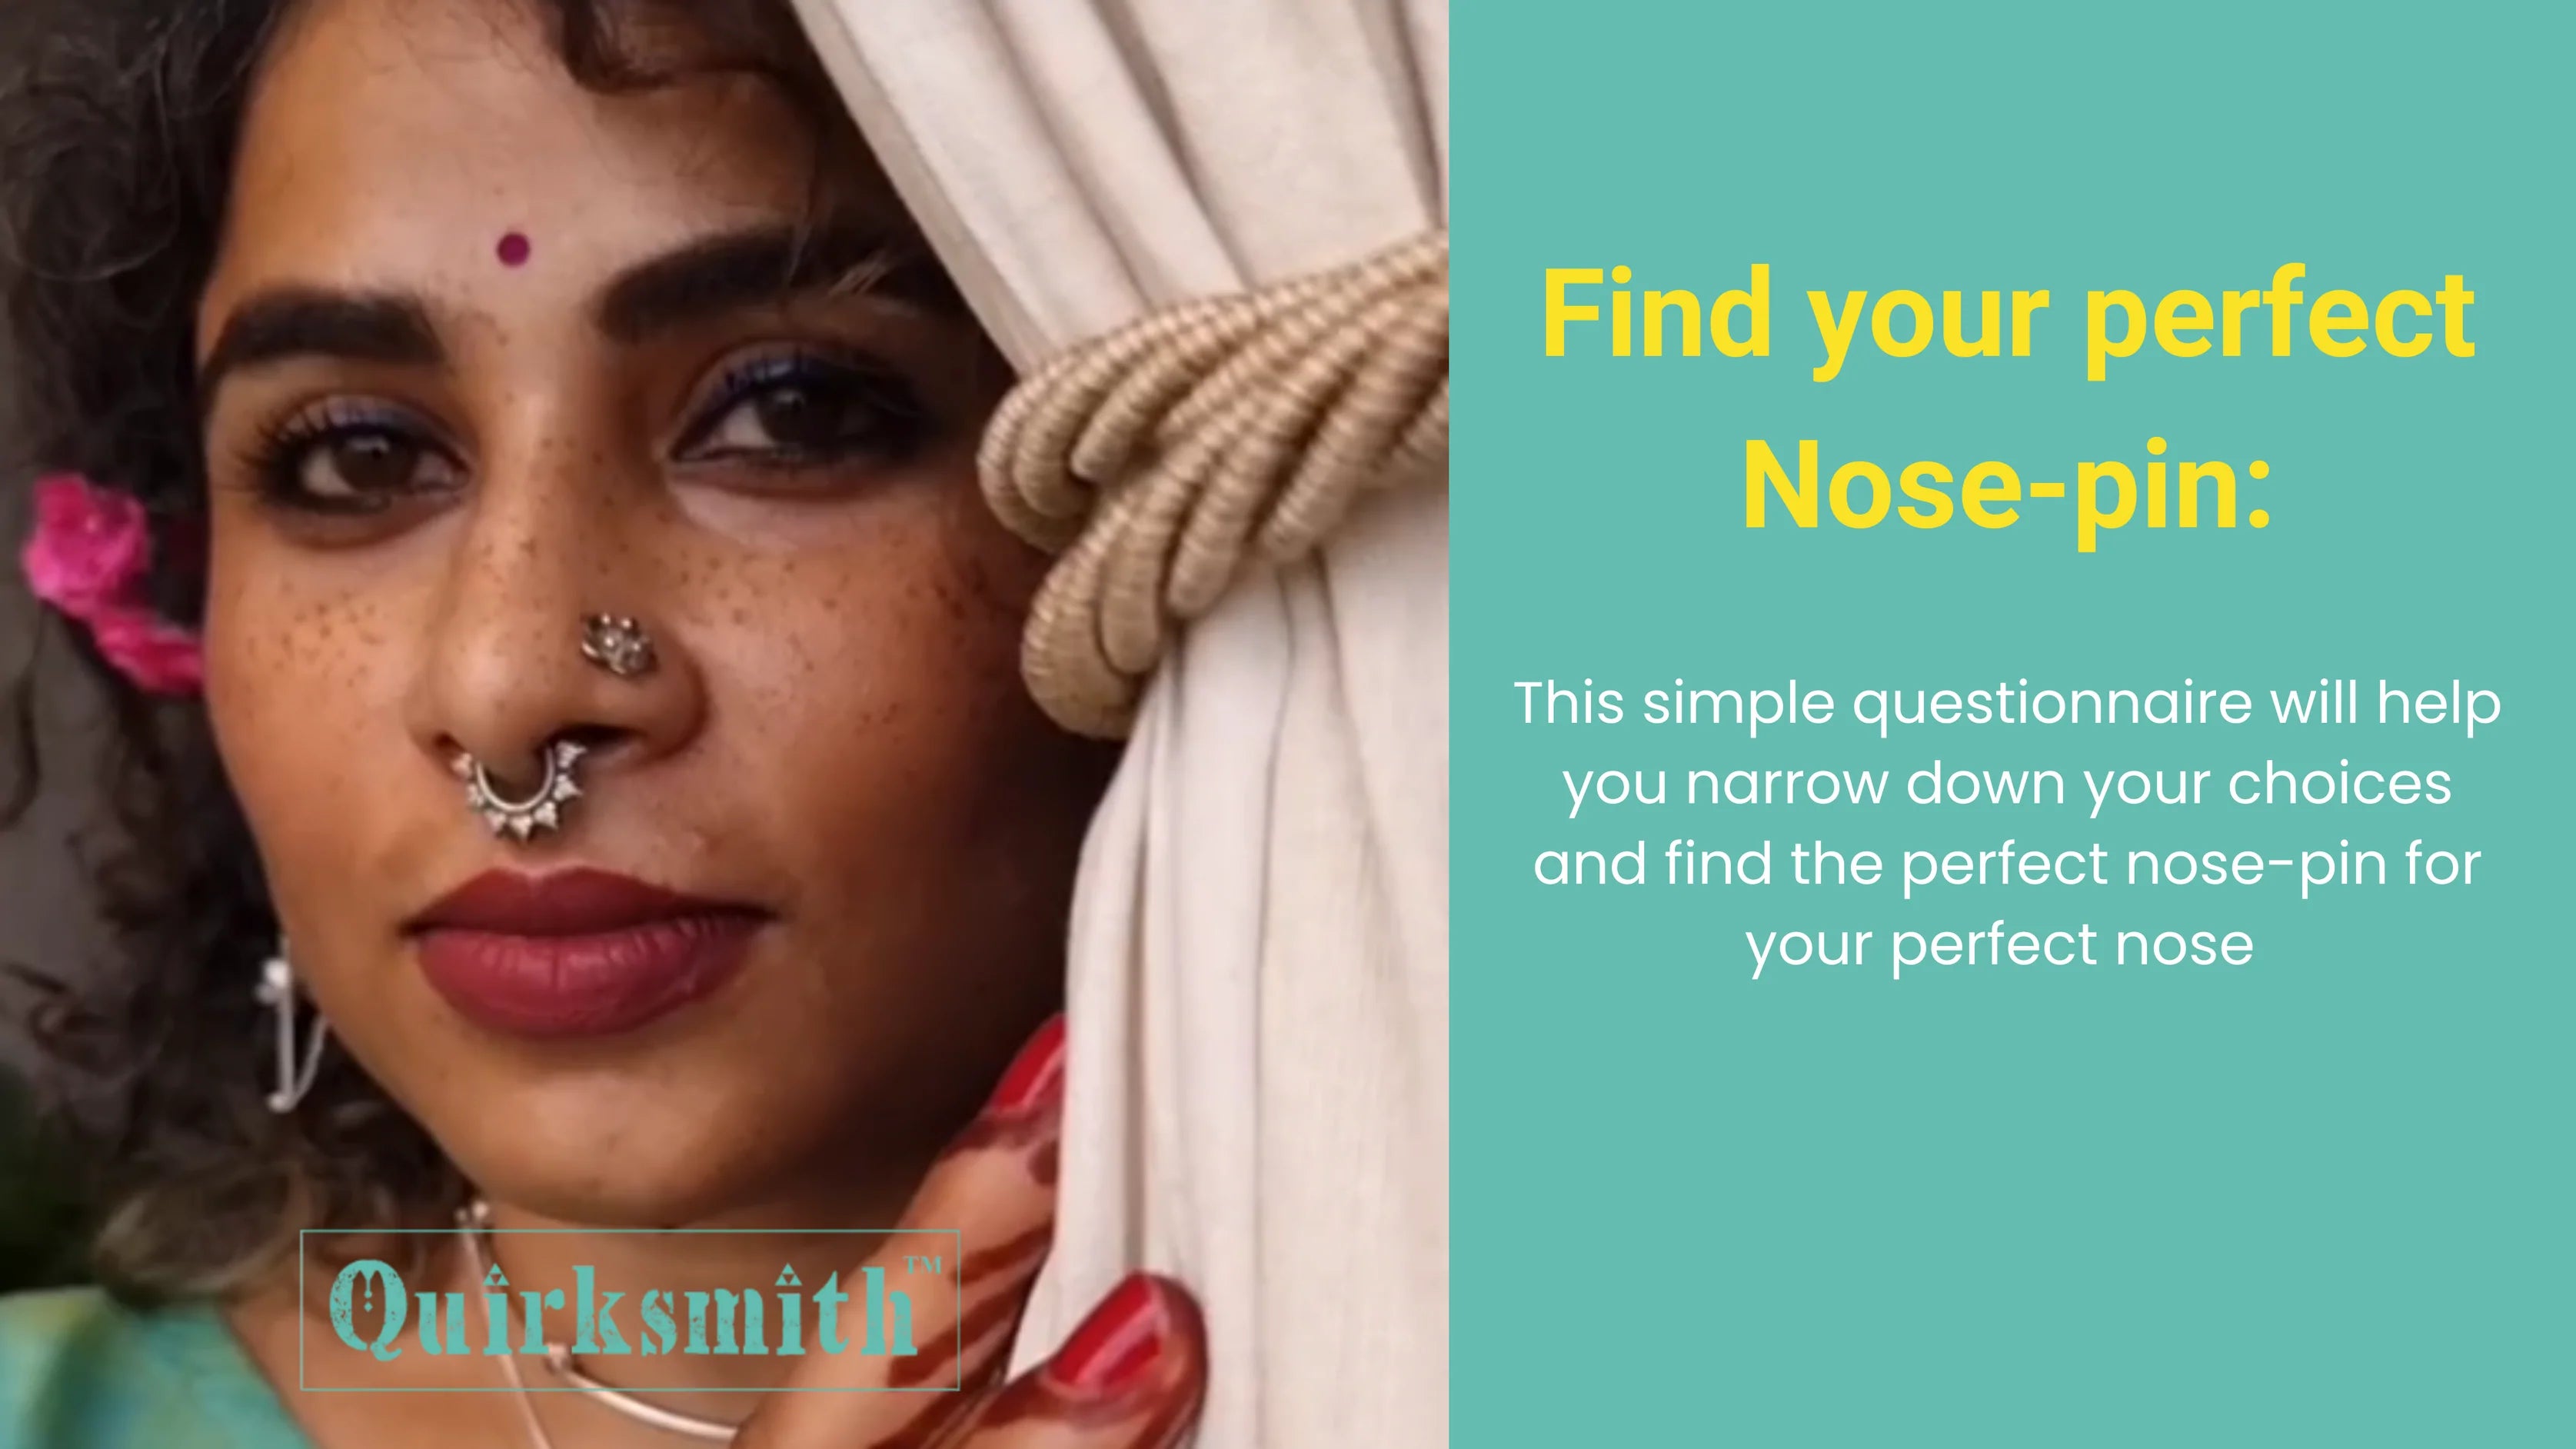 The Ultimate Guide to Nose-Pins